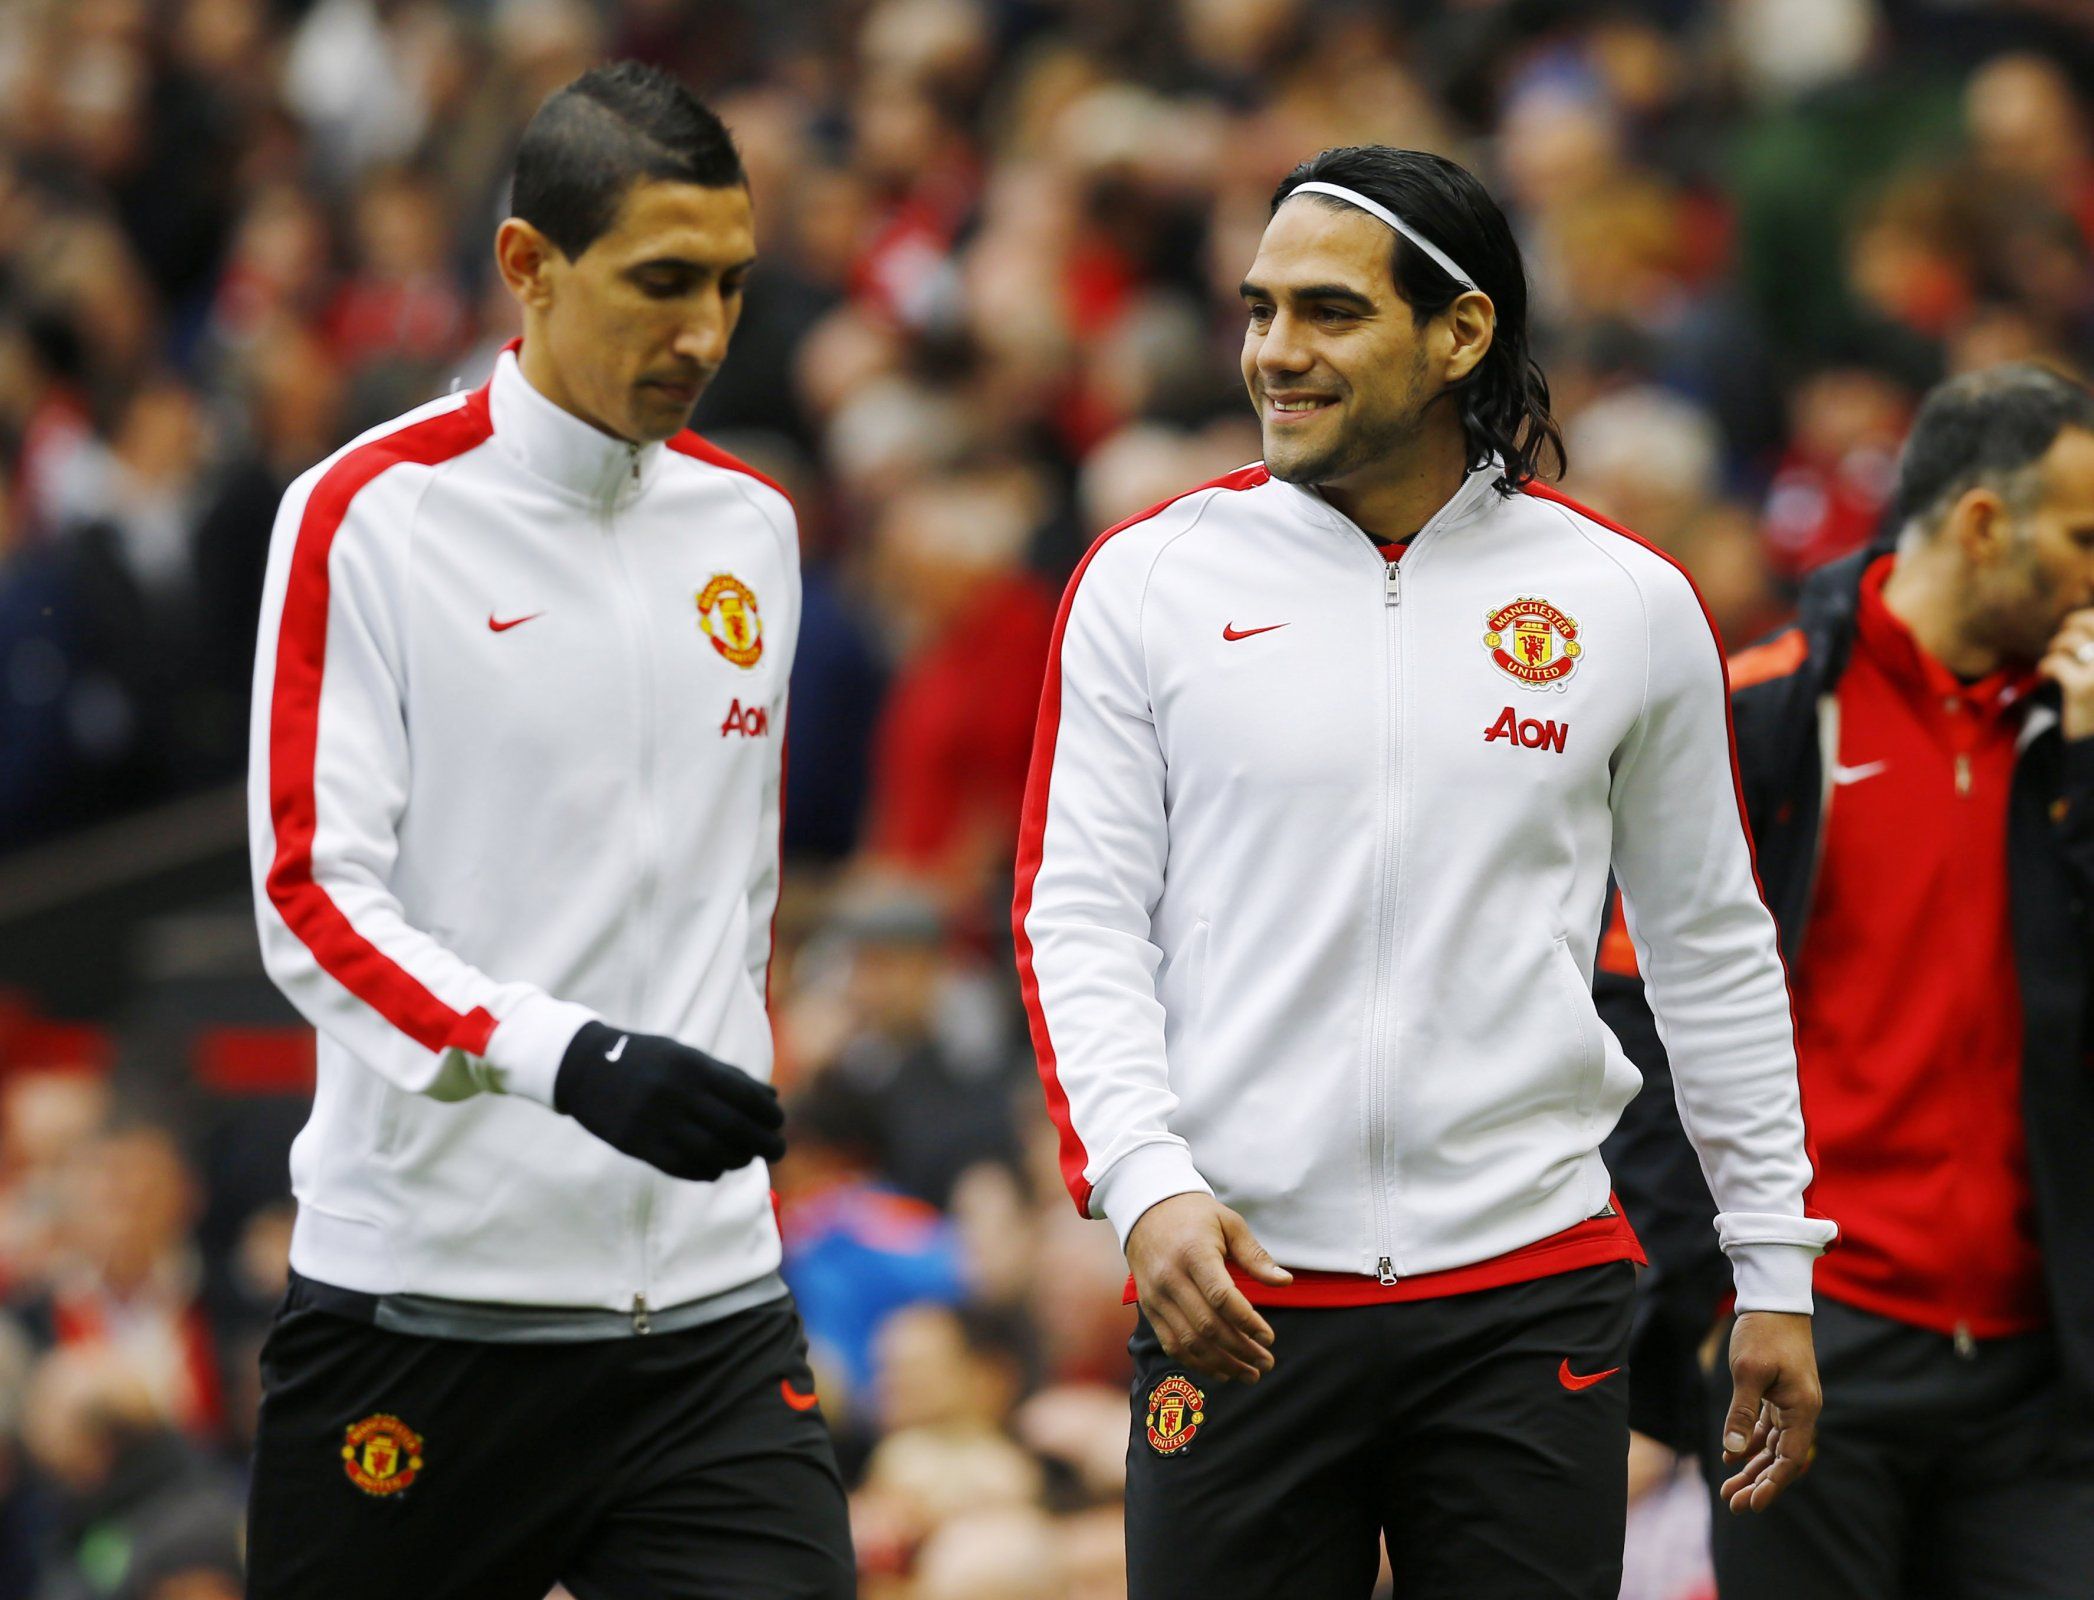 Angel Di Maria and Radamel Falcao in their Man United tracksuits